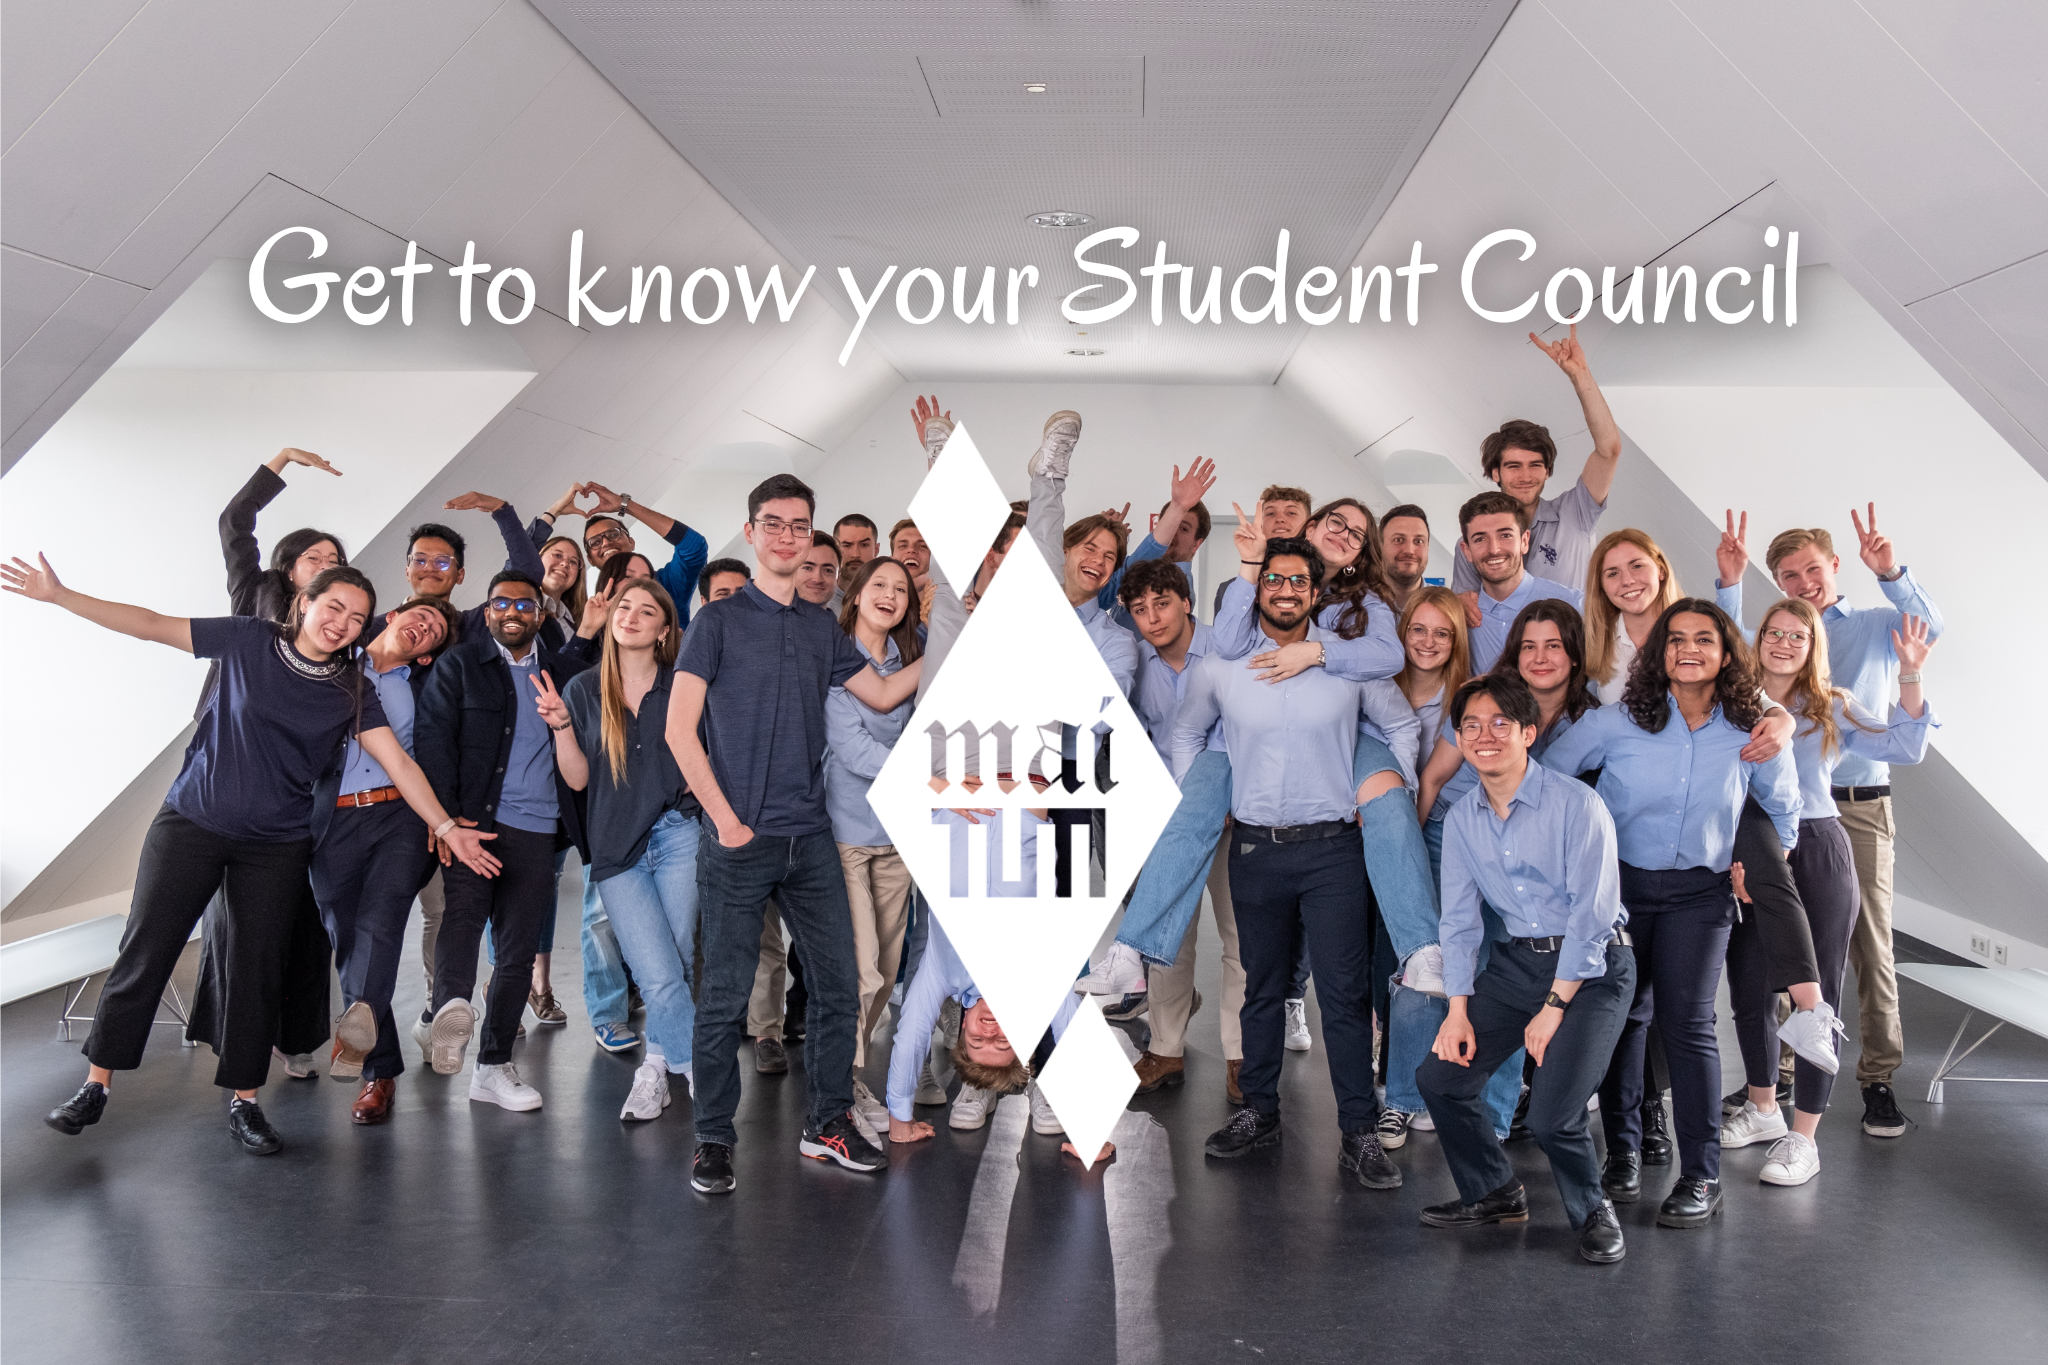 maiTUM – Get to know your student council